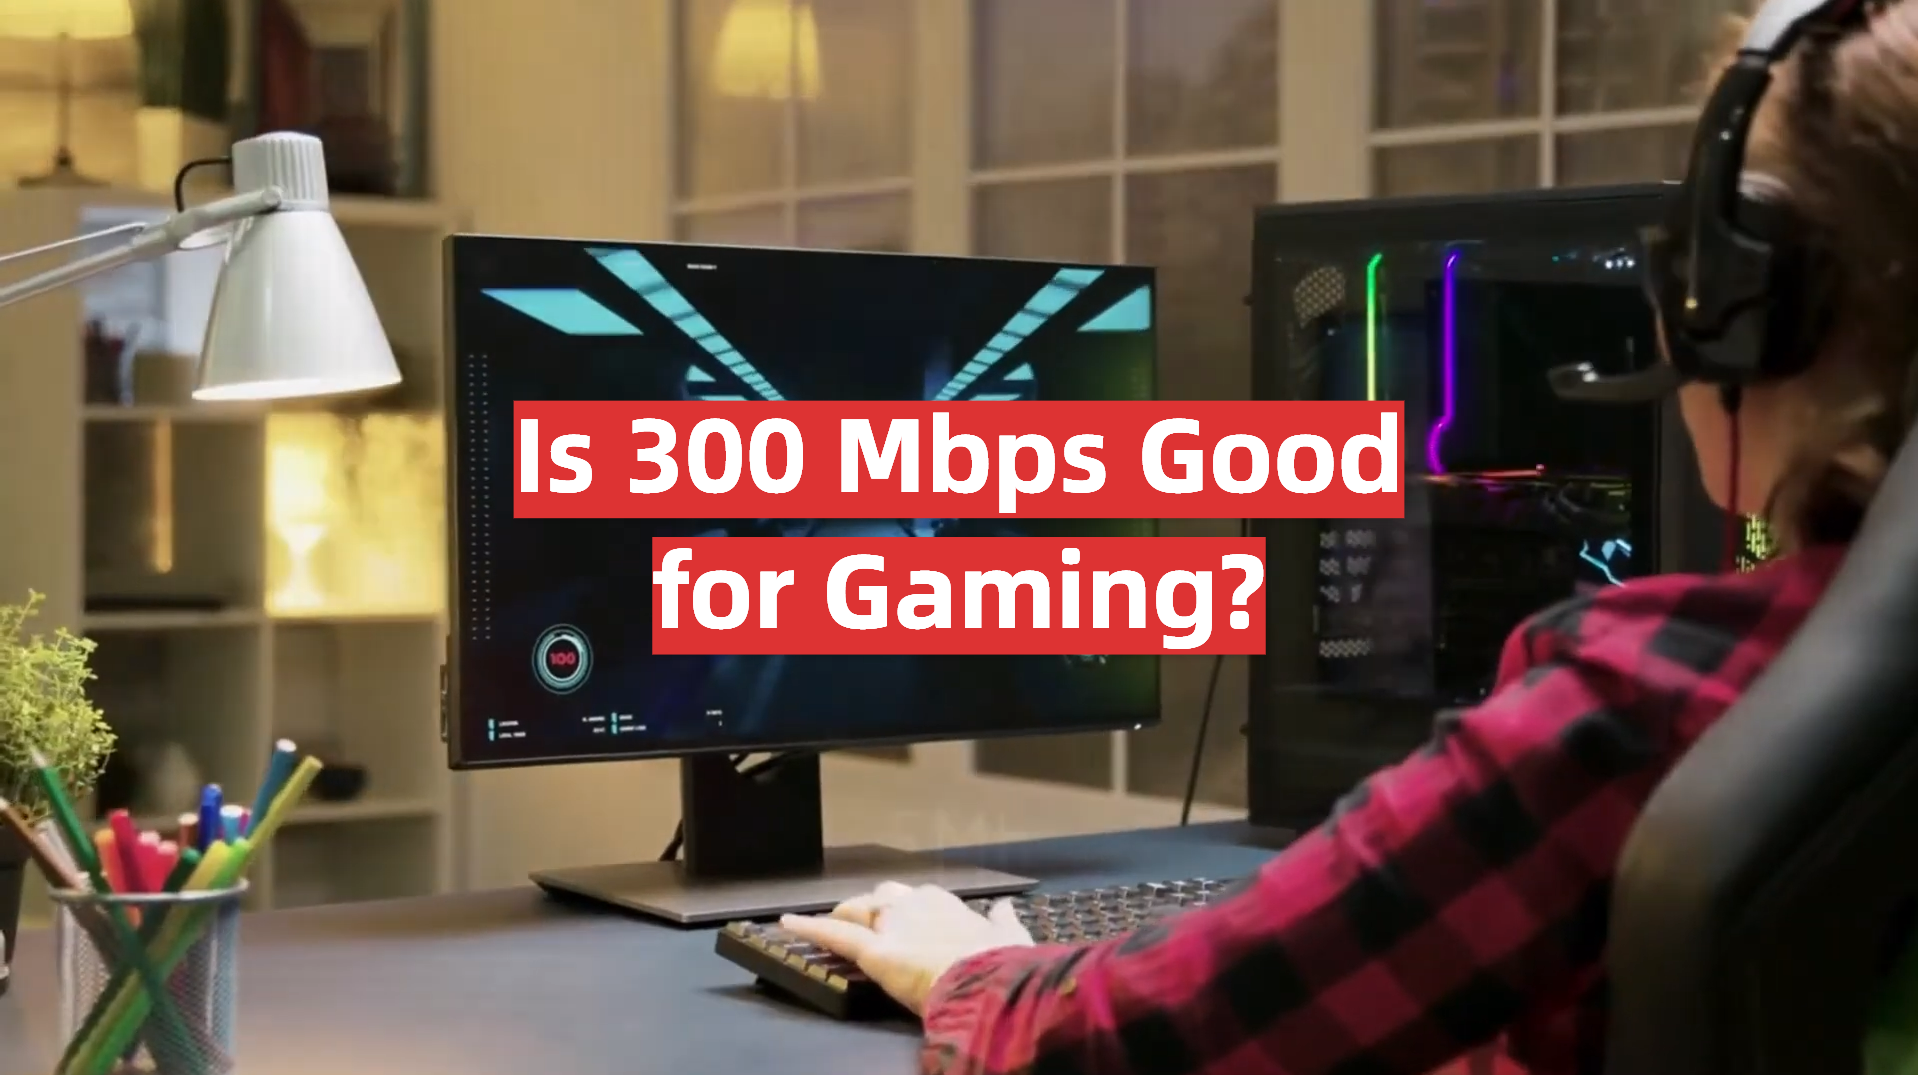 Is 300 Mbps Good for Gaming?